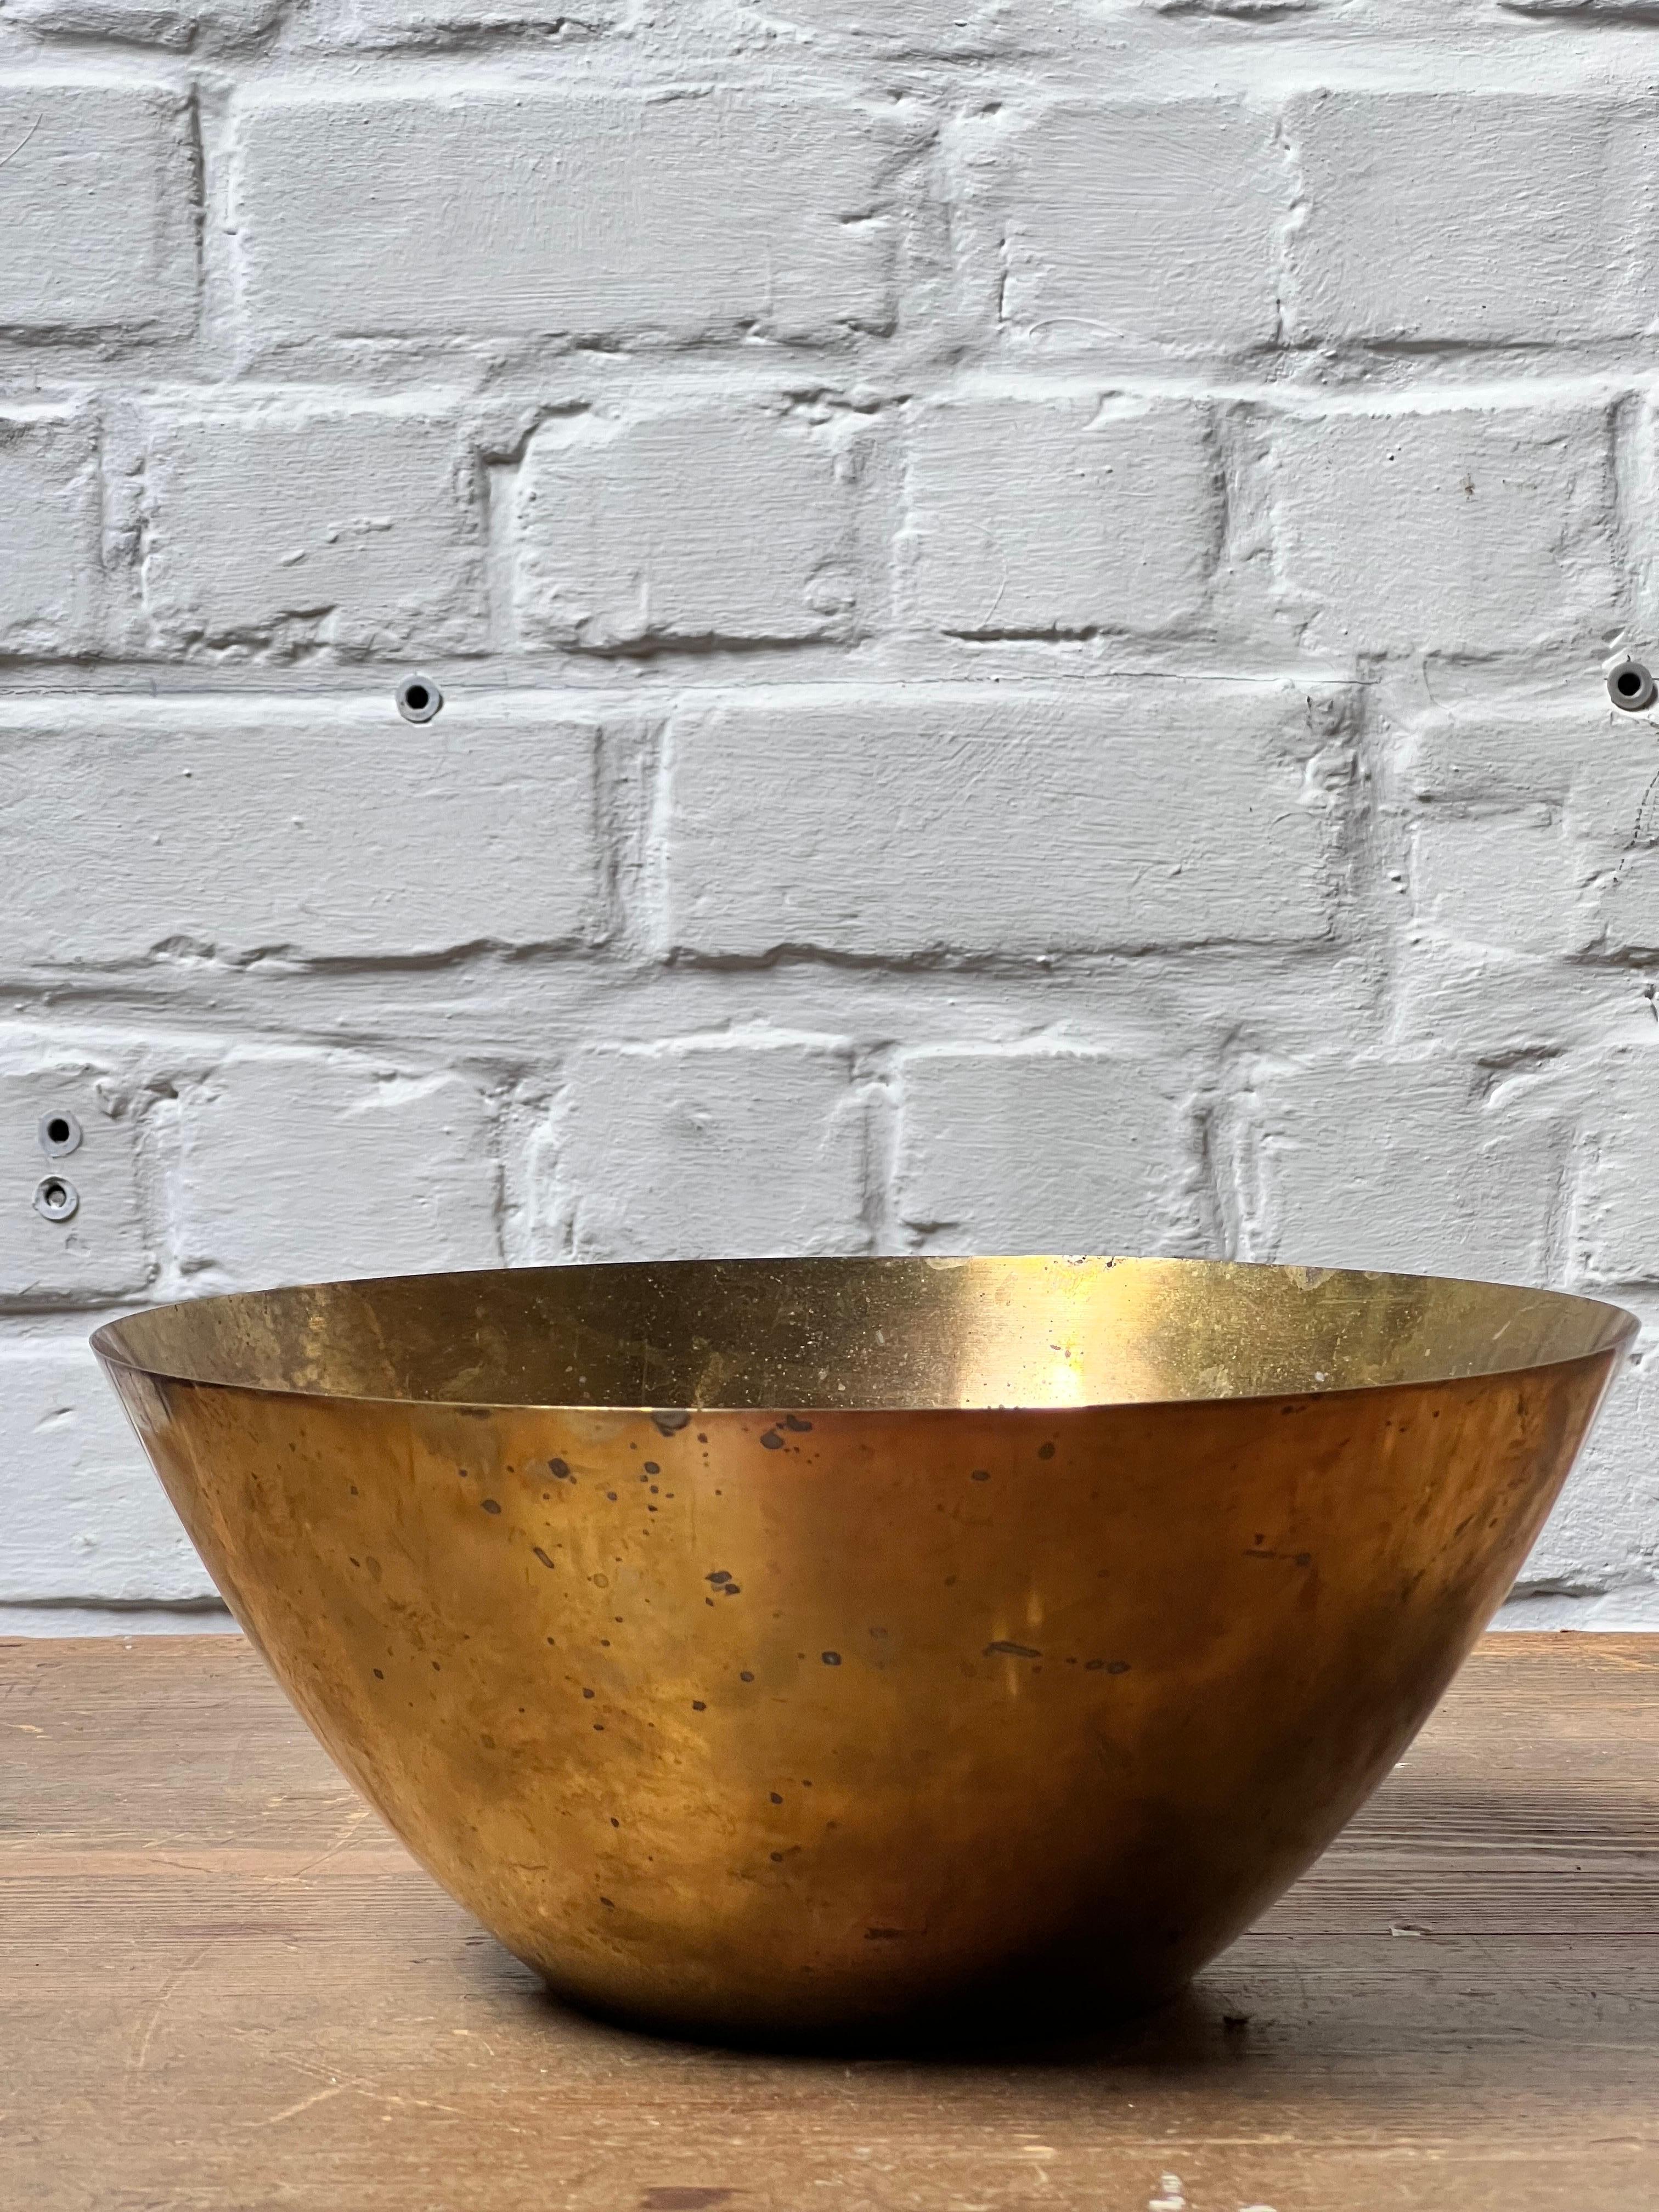 Original brass bowl by master Danish architect Arne Jacobsen. Model designed for Stelton a danish manufacturer . Lots of patina and traces of use that gives a warm feeling. Properly used but a real eye catcher in any interior.